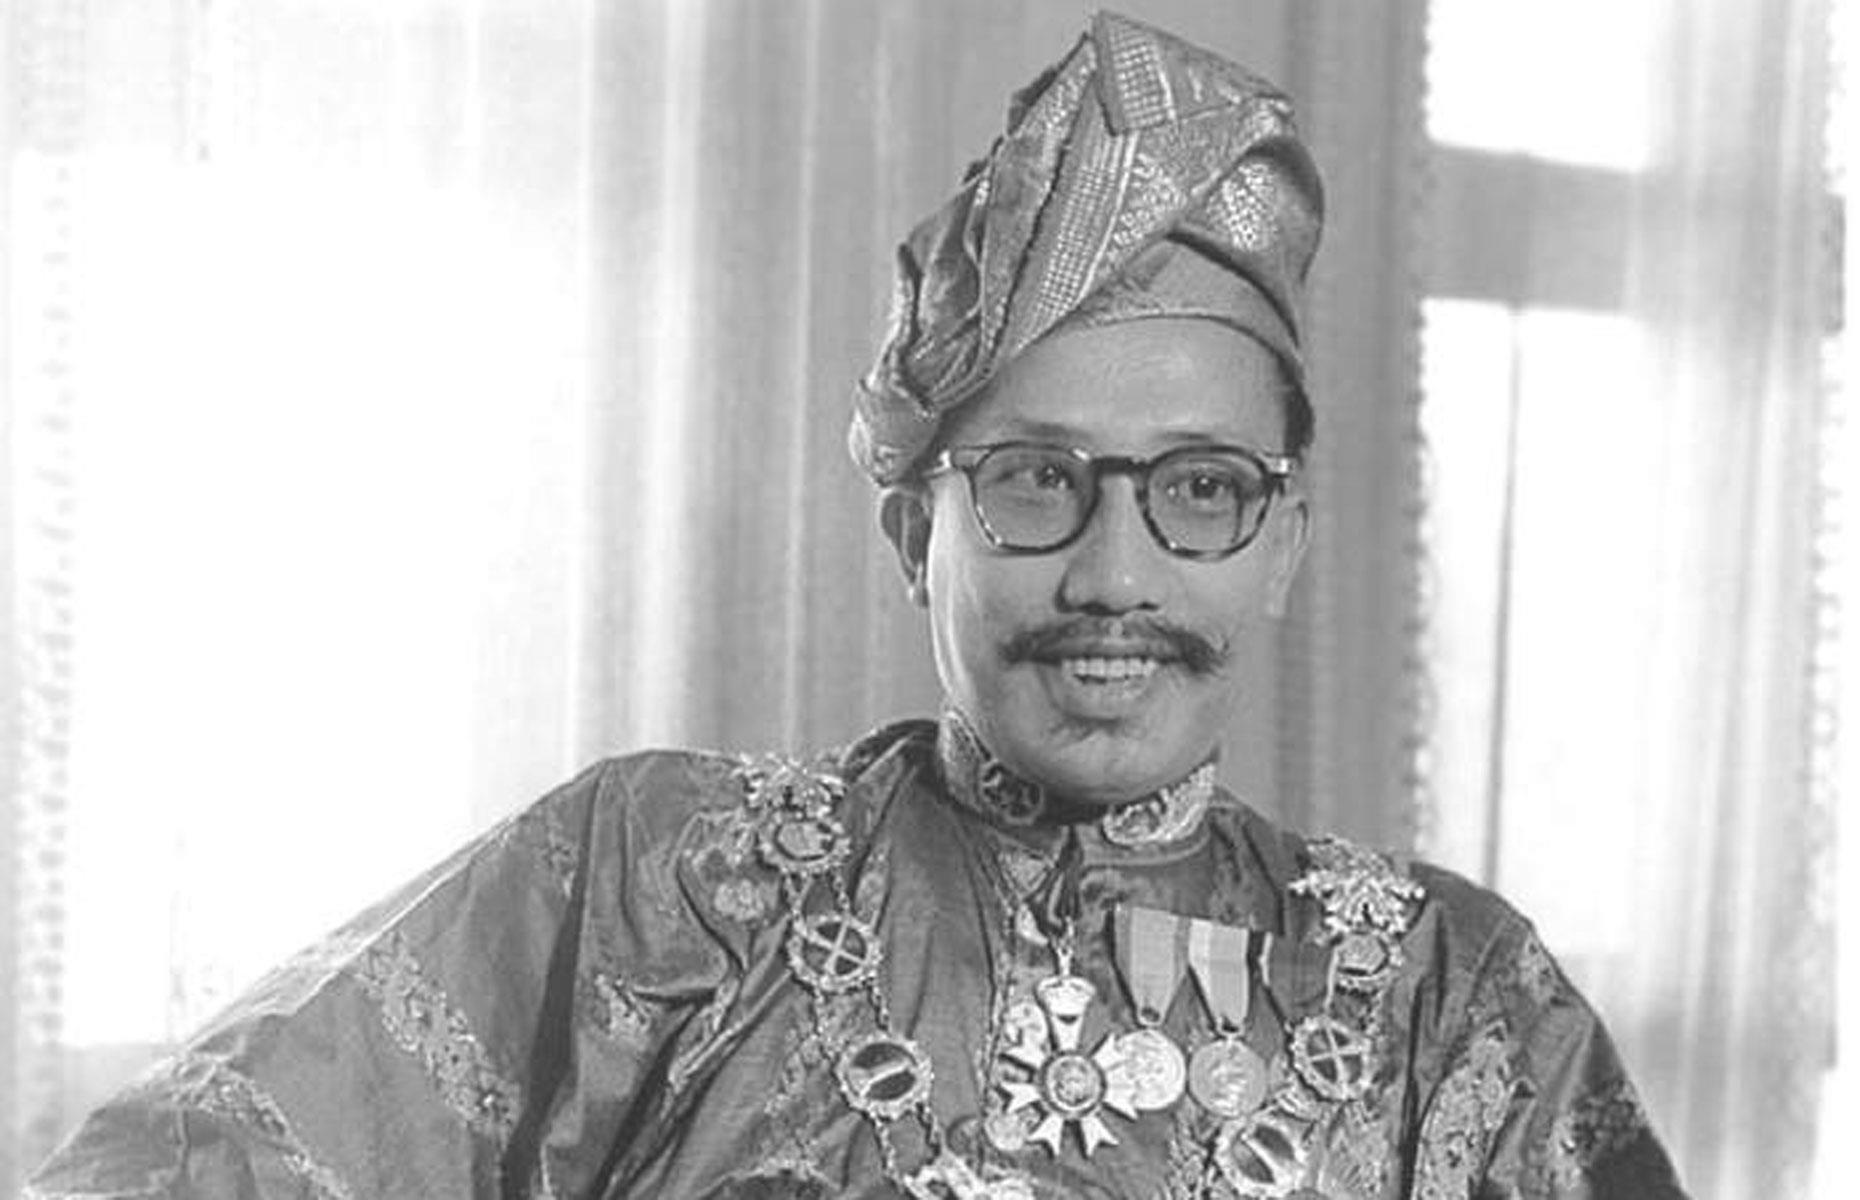 <p>Despite the Great Depression and World War II, which stalled the growth of the oil industry, the sultanate became steadily richer during the 1930s and 1940s from exports of "black gold", reaping bumper royalties.</p>  <p>The 28th Sultan, Omar Ali Saifuddien III (pictured), implemented a series of National Development Plans during the 1950s and 1960s. The reforms updated infrastructure, created an advanced education system, and massively improved public health. </p>